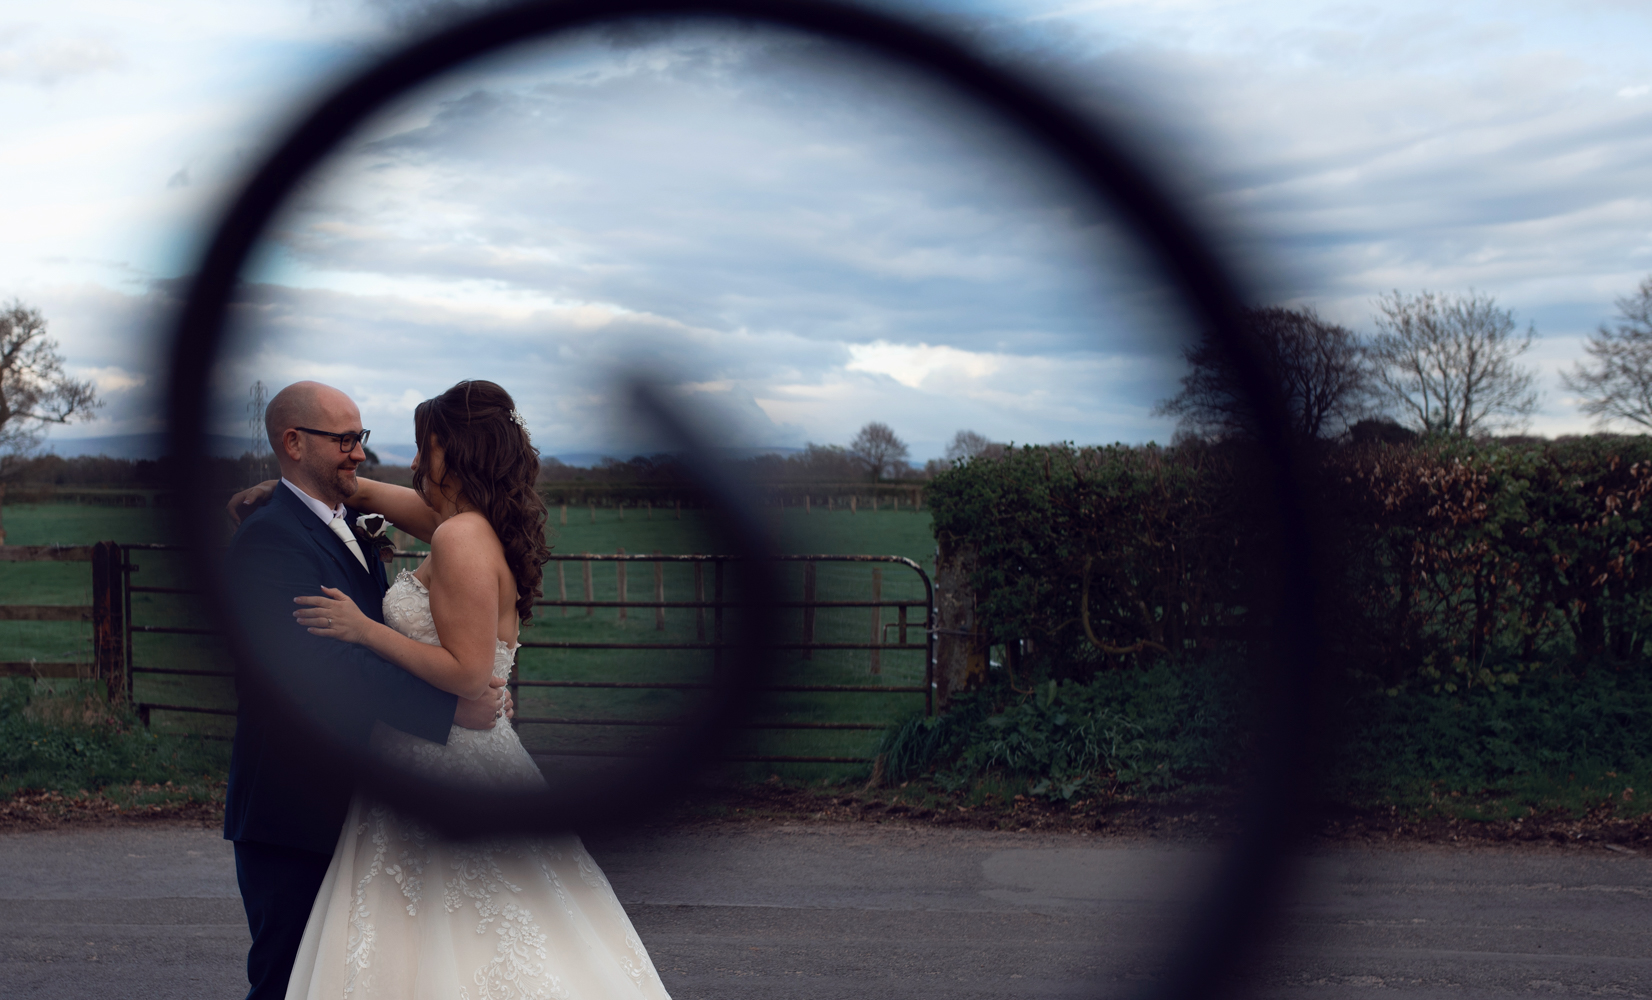 Photo of the bride and groom taken through a wrought iron gate swirl